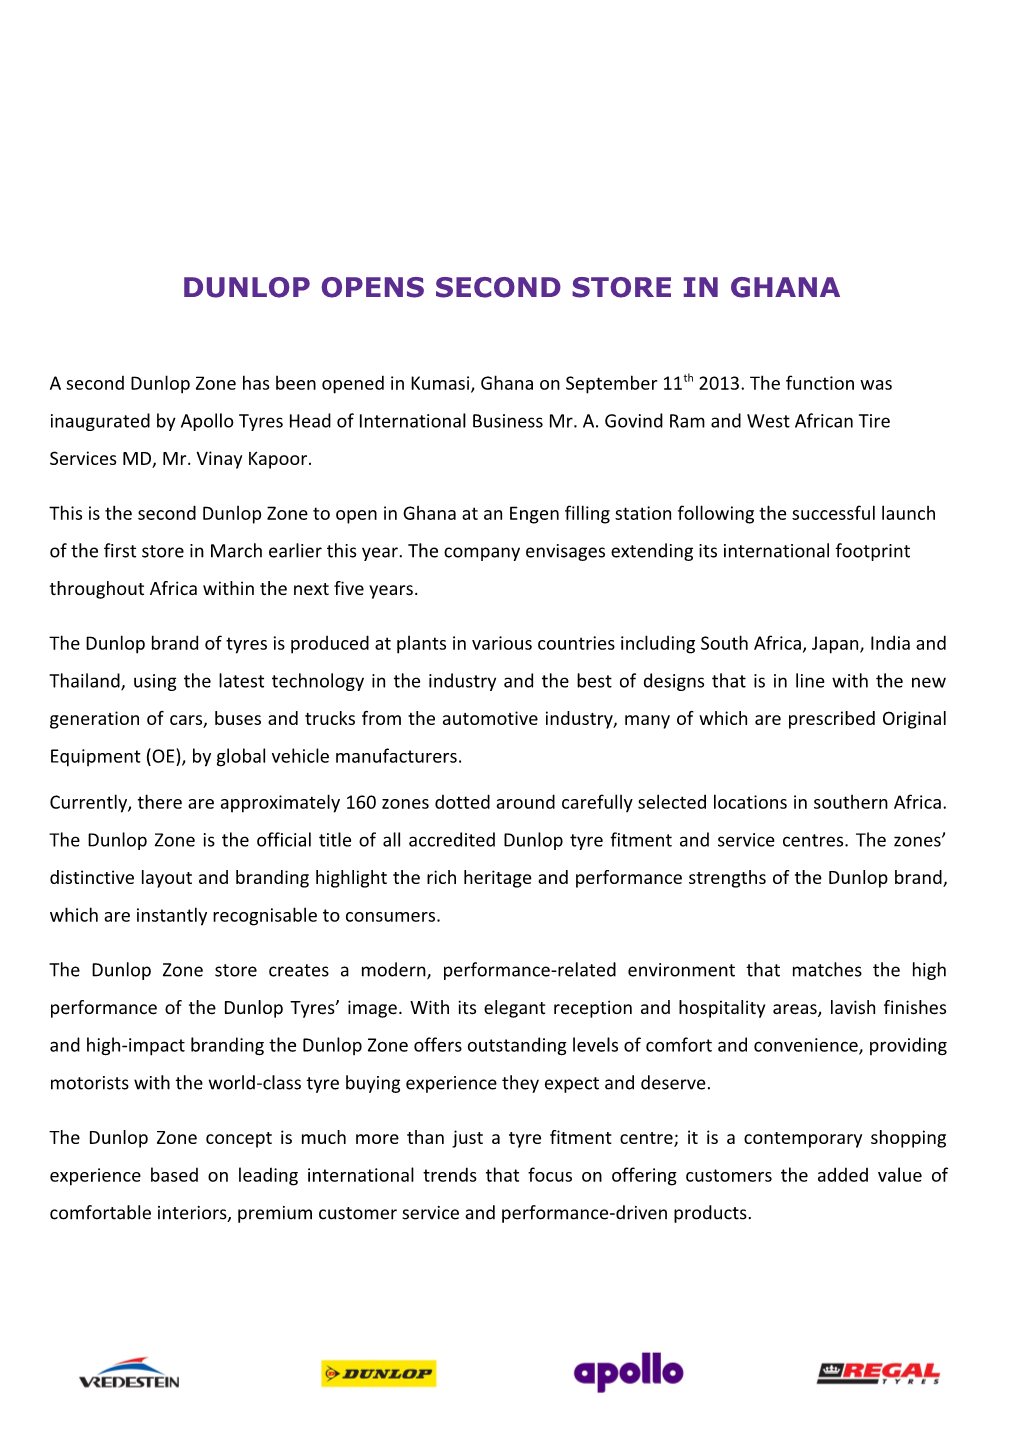 Dunlop Opens Second Store in Ghana